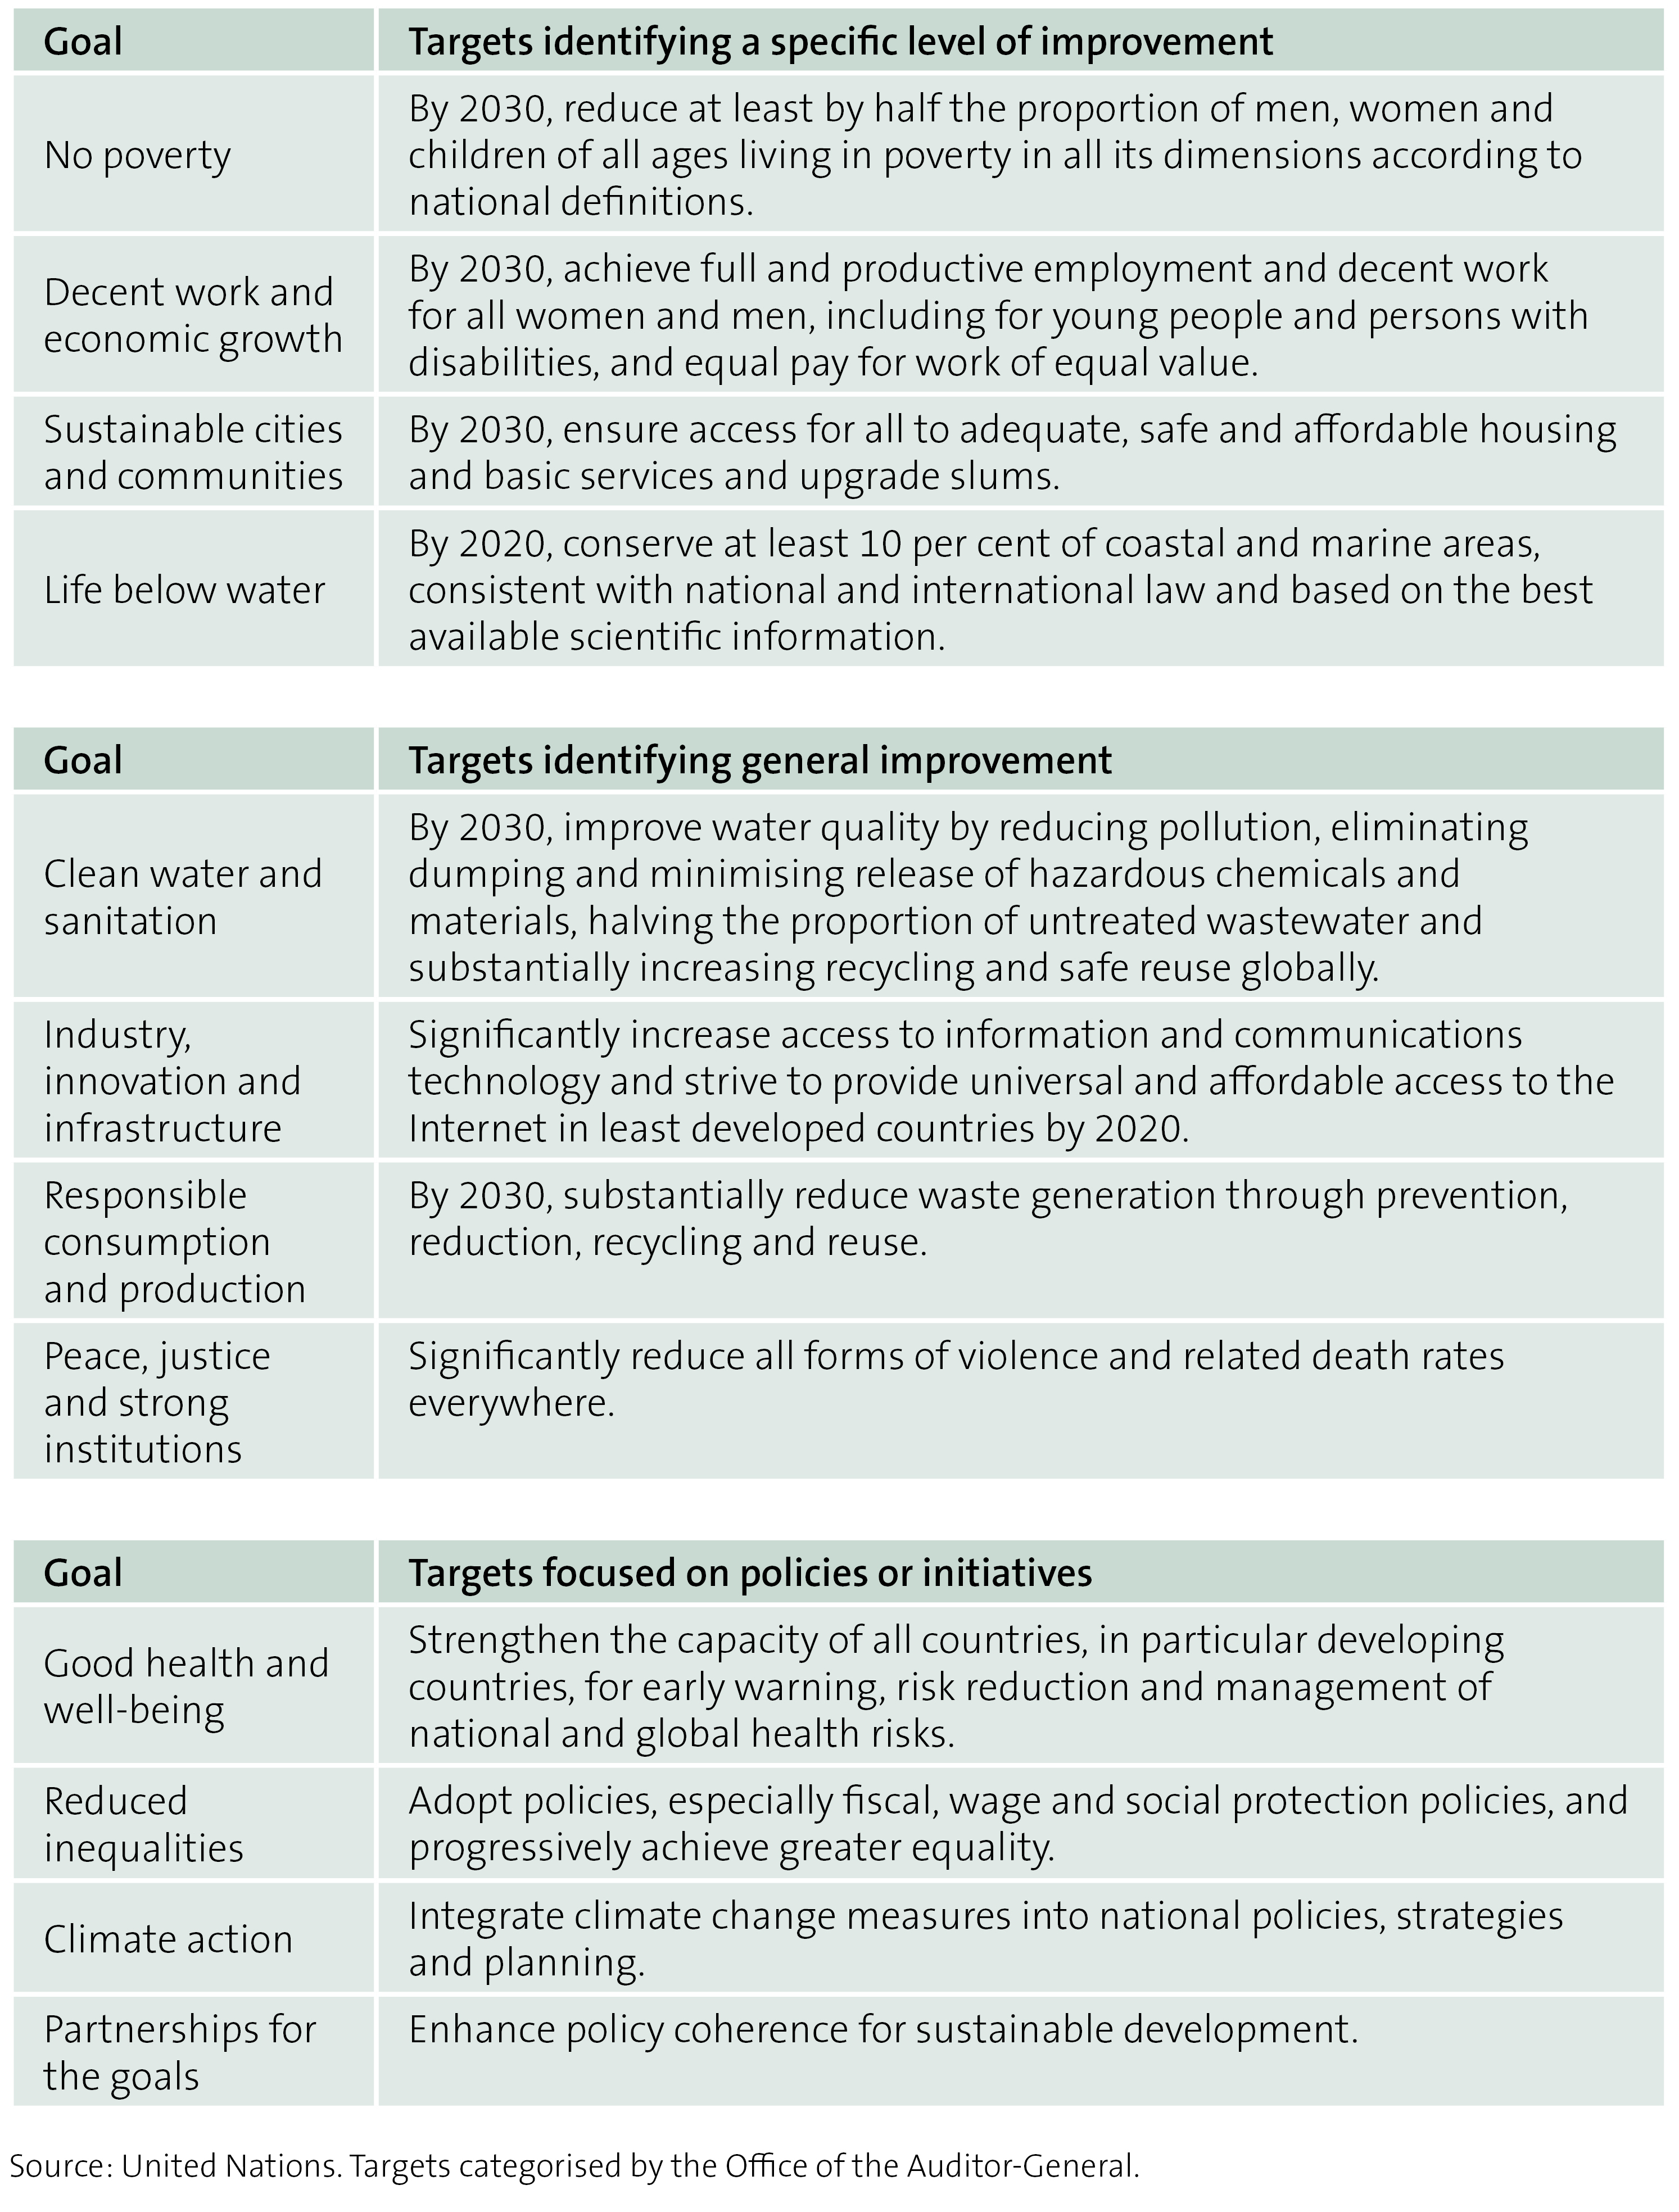 Figure 2 - Examples of different types of global targets for the sustainable development goals